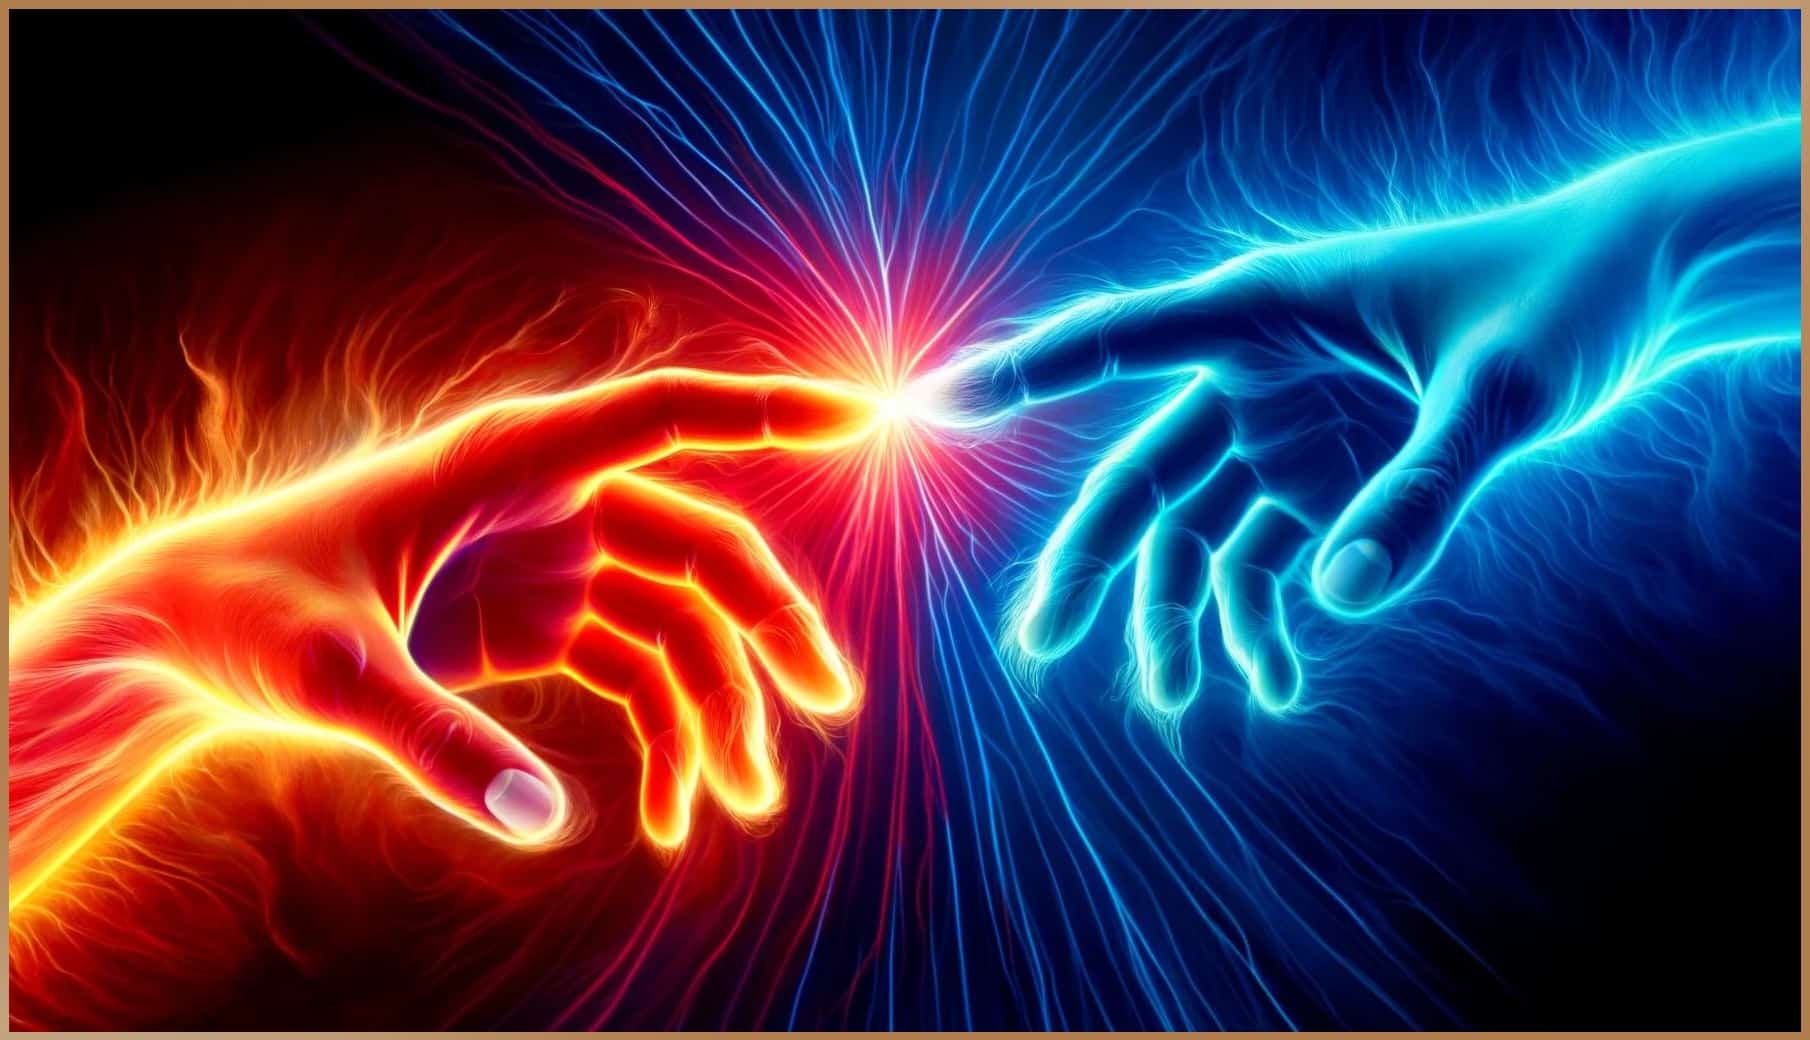 Abstract representation of vibrant energy transfer between two hands with electric blue and fiery orange colors symbolizing dynamic human interaction.